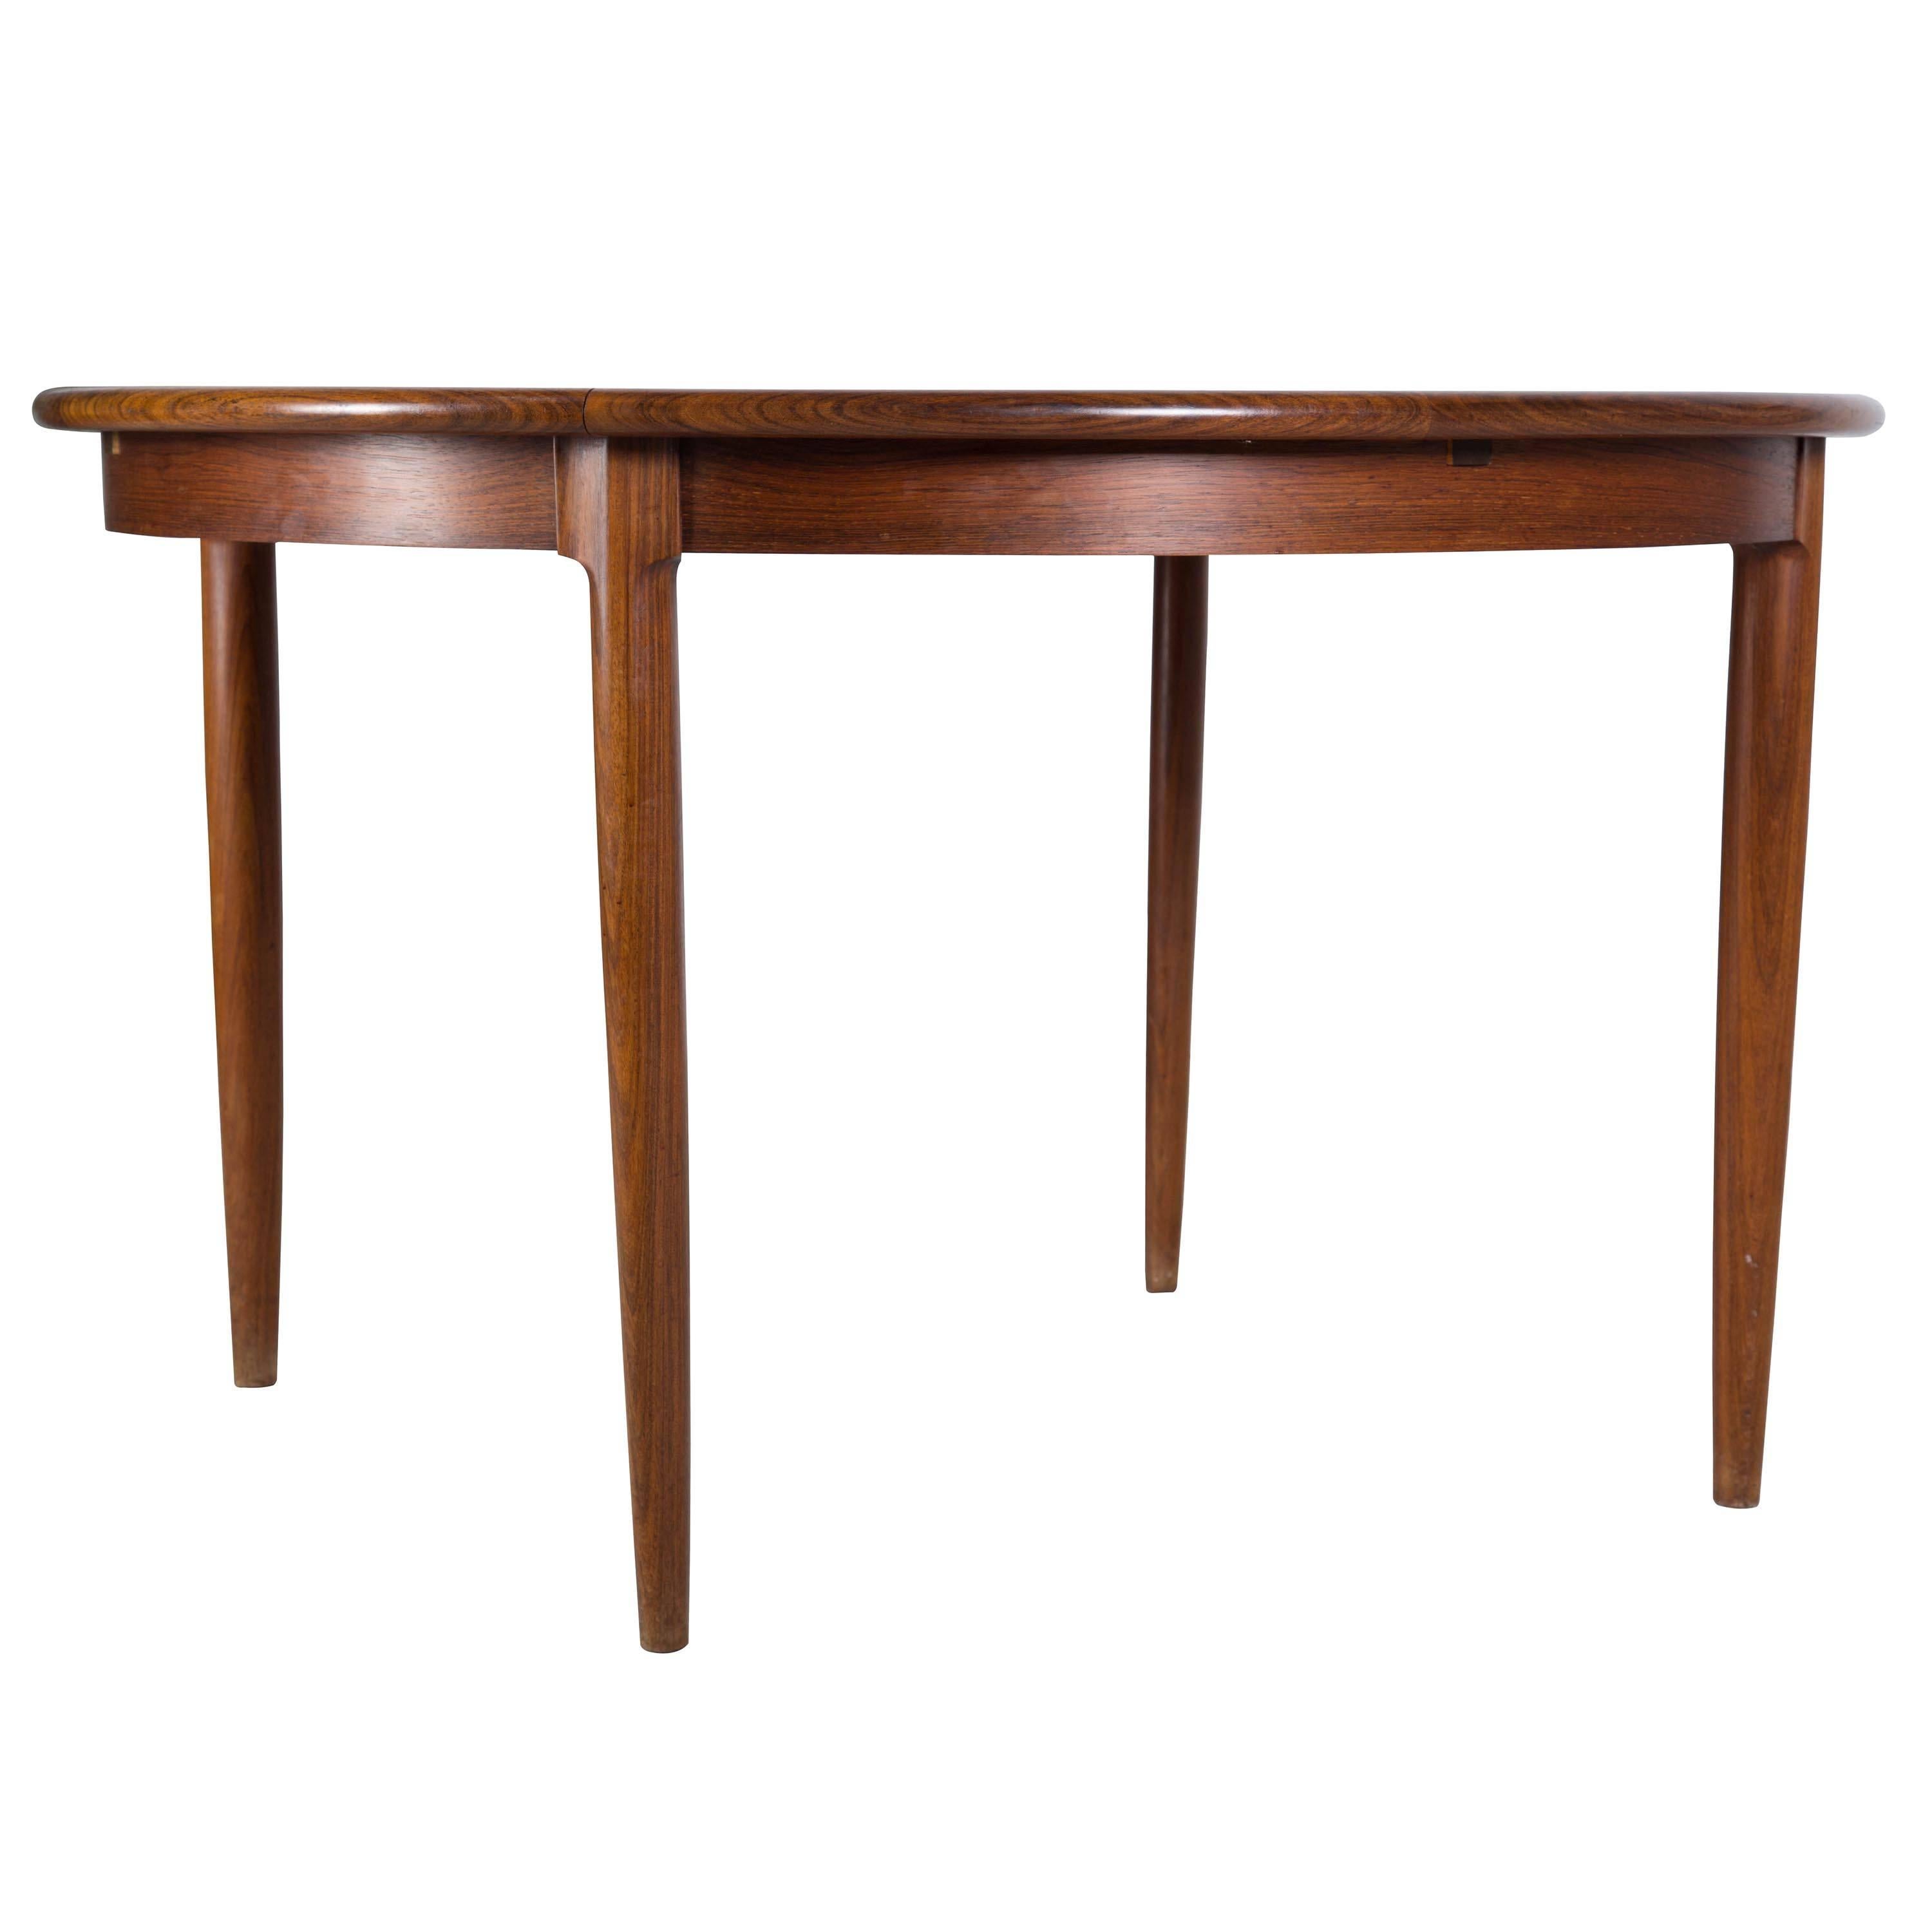 Niels Otto Moller designed (model number 15) mid-20th century rosewood dining table extendable with butterfly leaf.